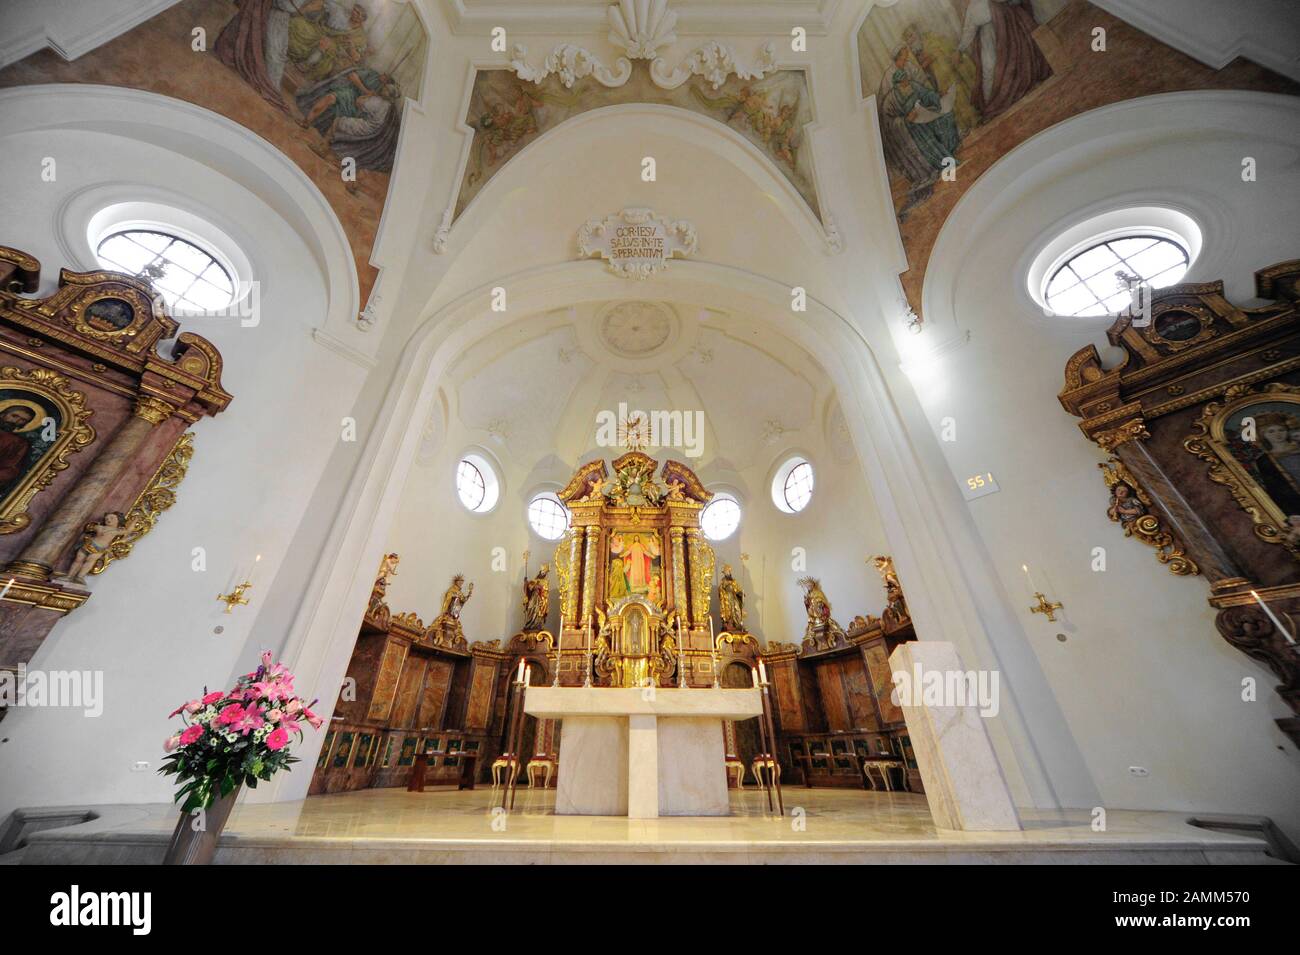 Reopening of the renovated church St. Sylvester in Biedersteiner Straße 1 in Schwabing. The picture shows the view into the chapel. [automated translation] Stock Photo